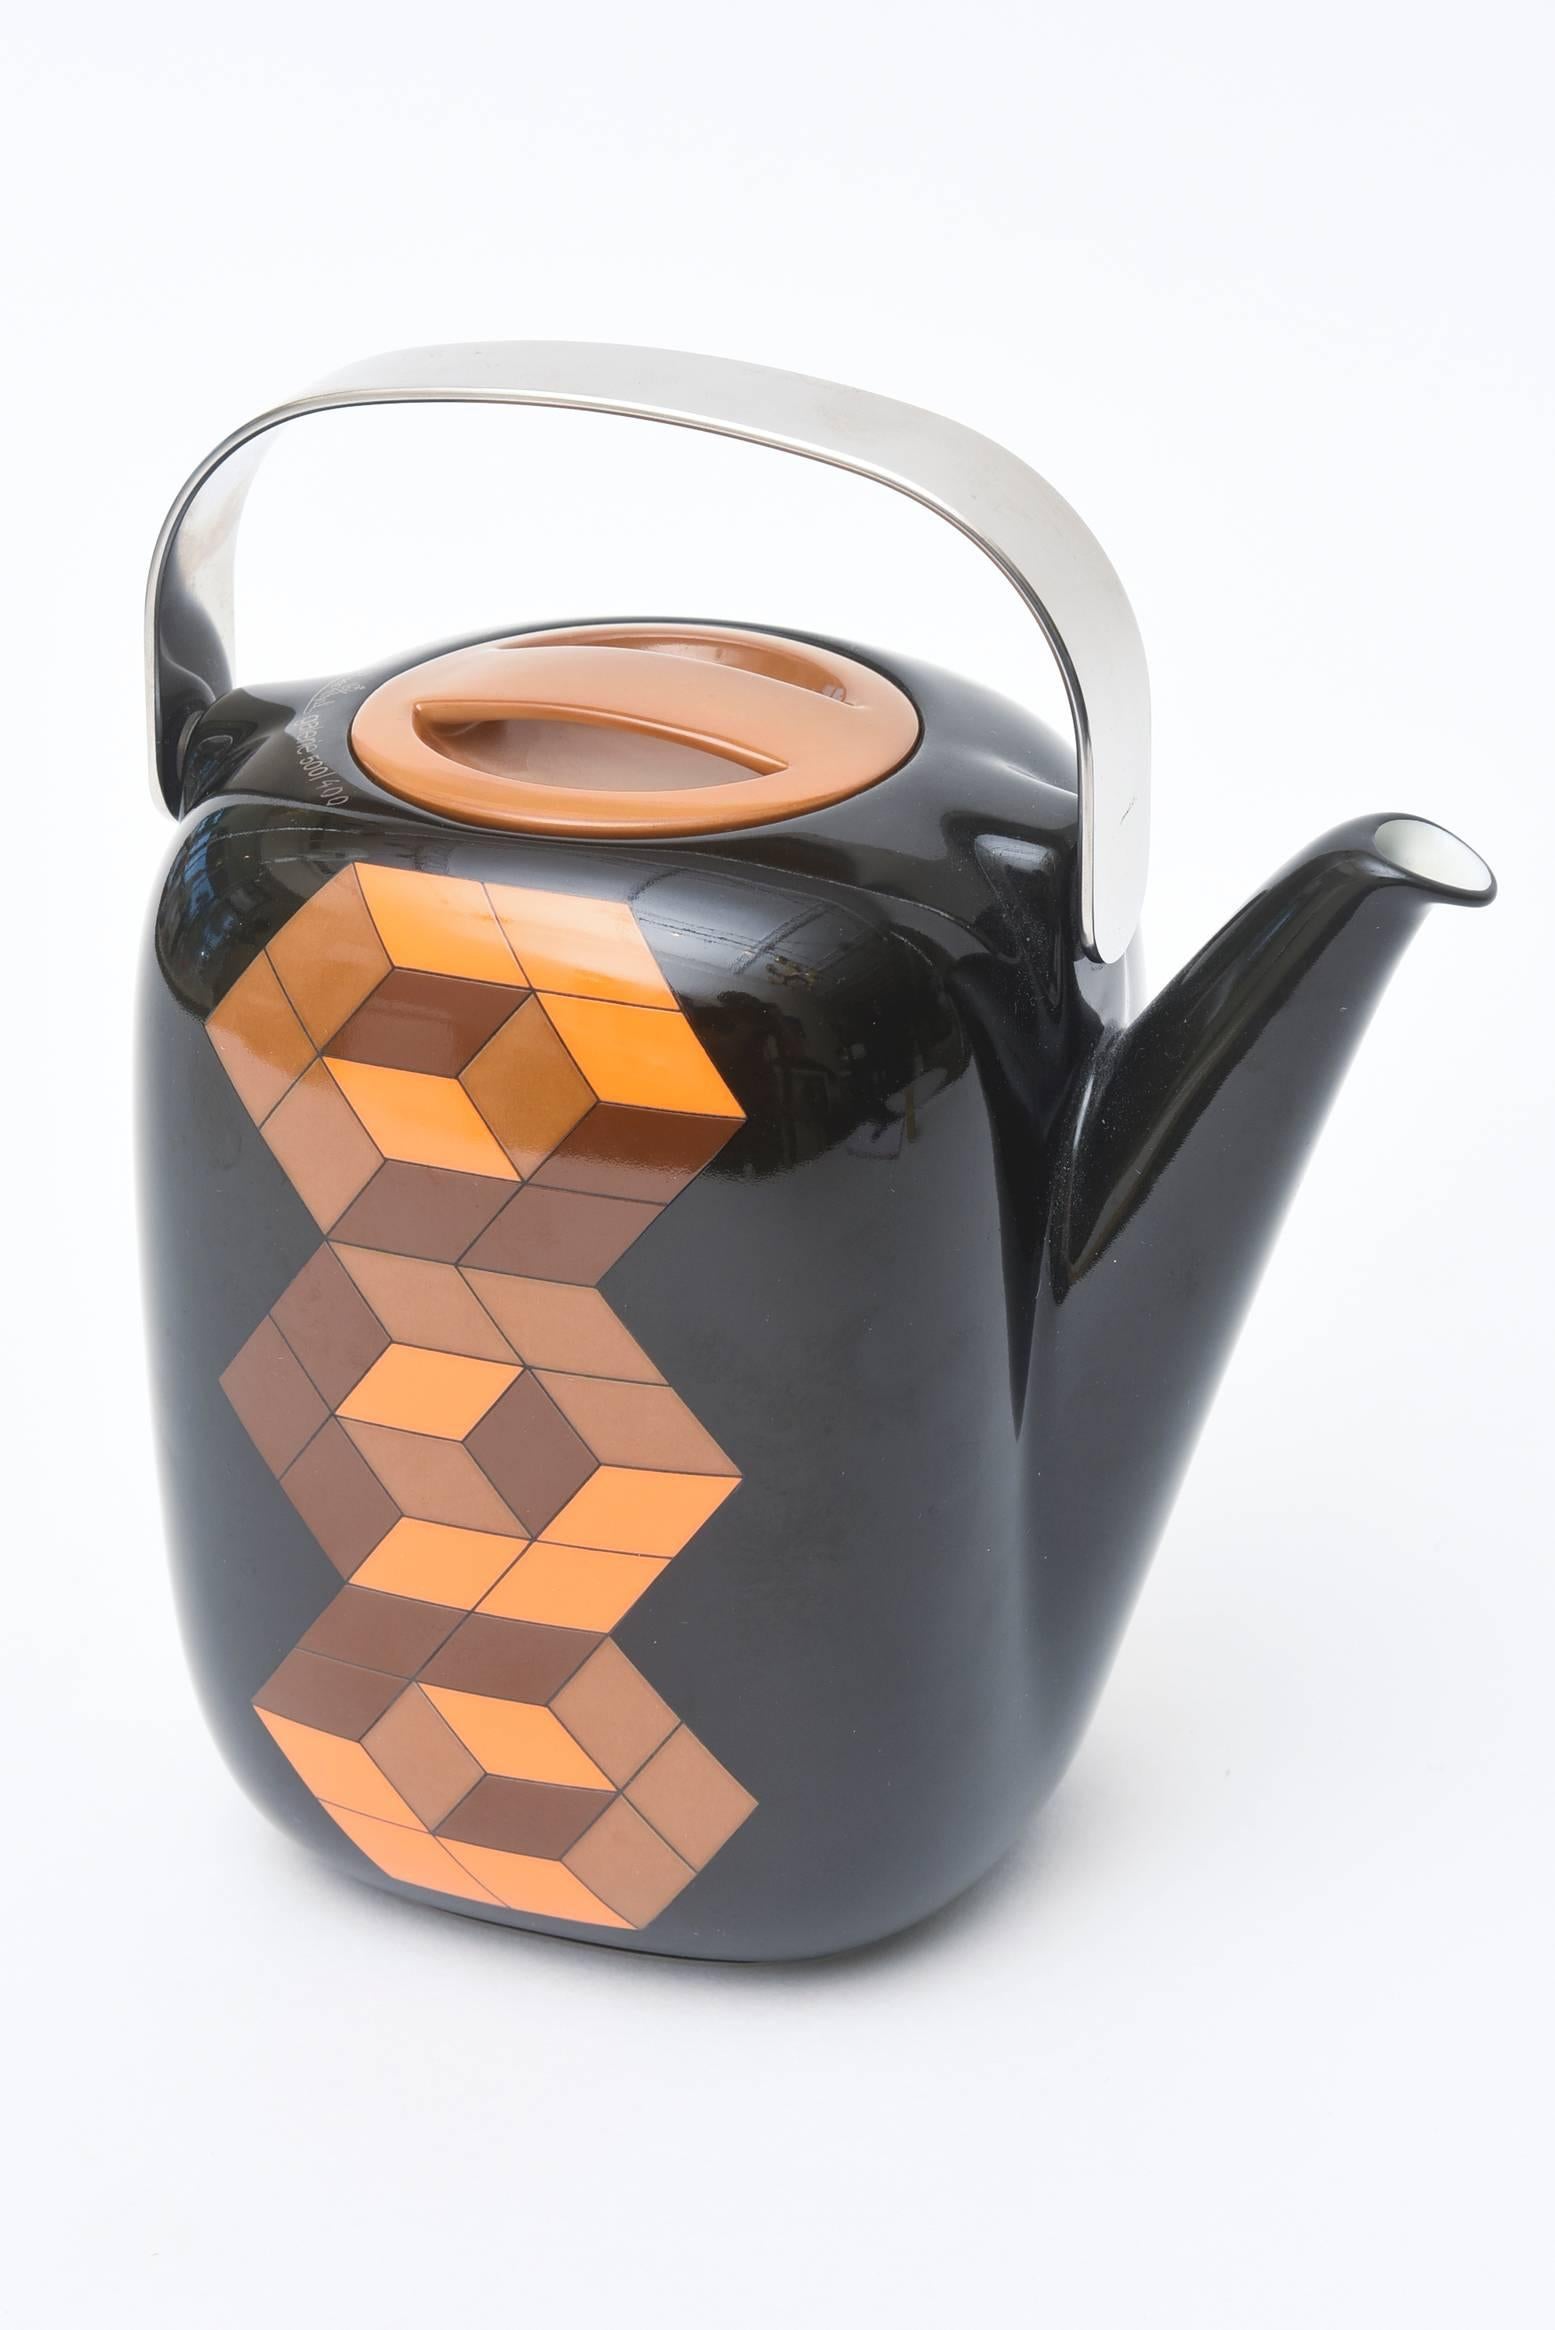 This lovely and arresting optical hallmarked teapot with a stainless steel handle,
was designed by Victor Vasarely for Rosenthal. It is hallmarked in two places and is a limited edition of 500. This is signed 400/500.
The color palette is more